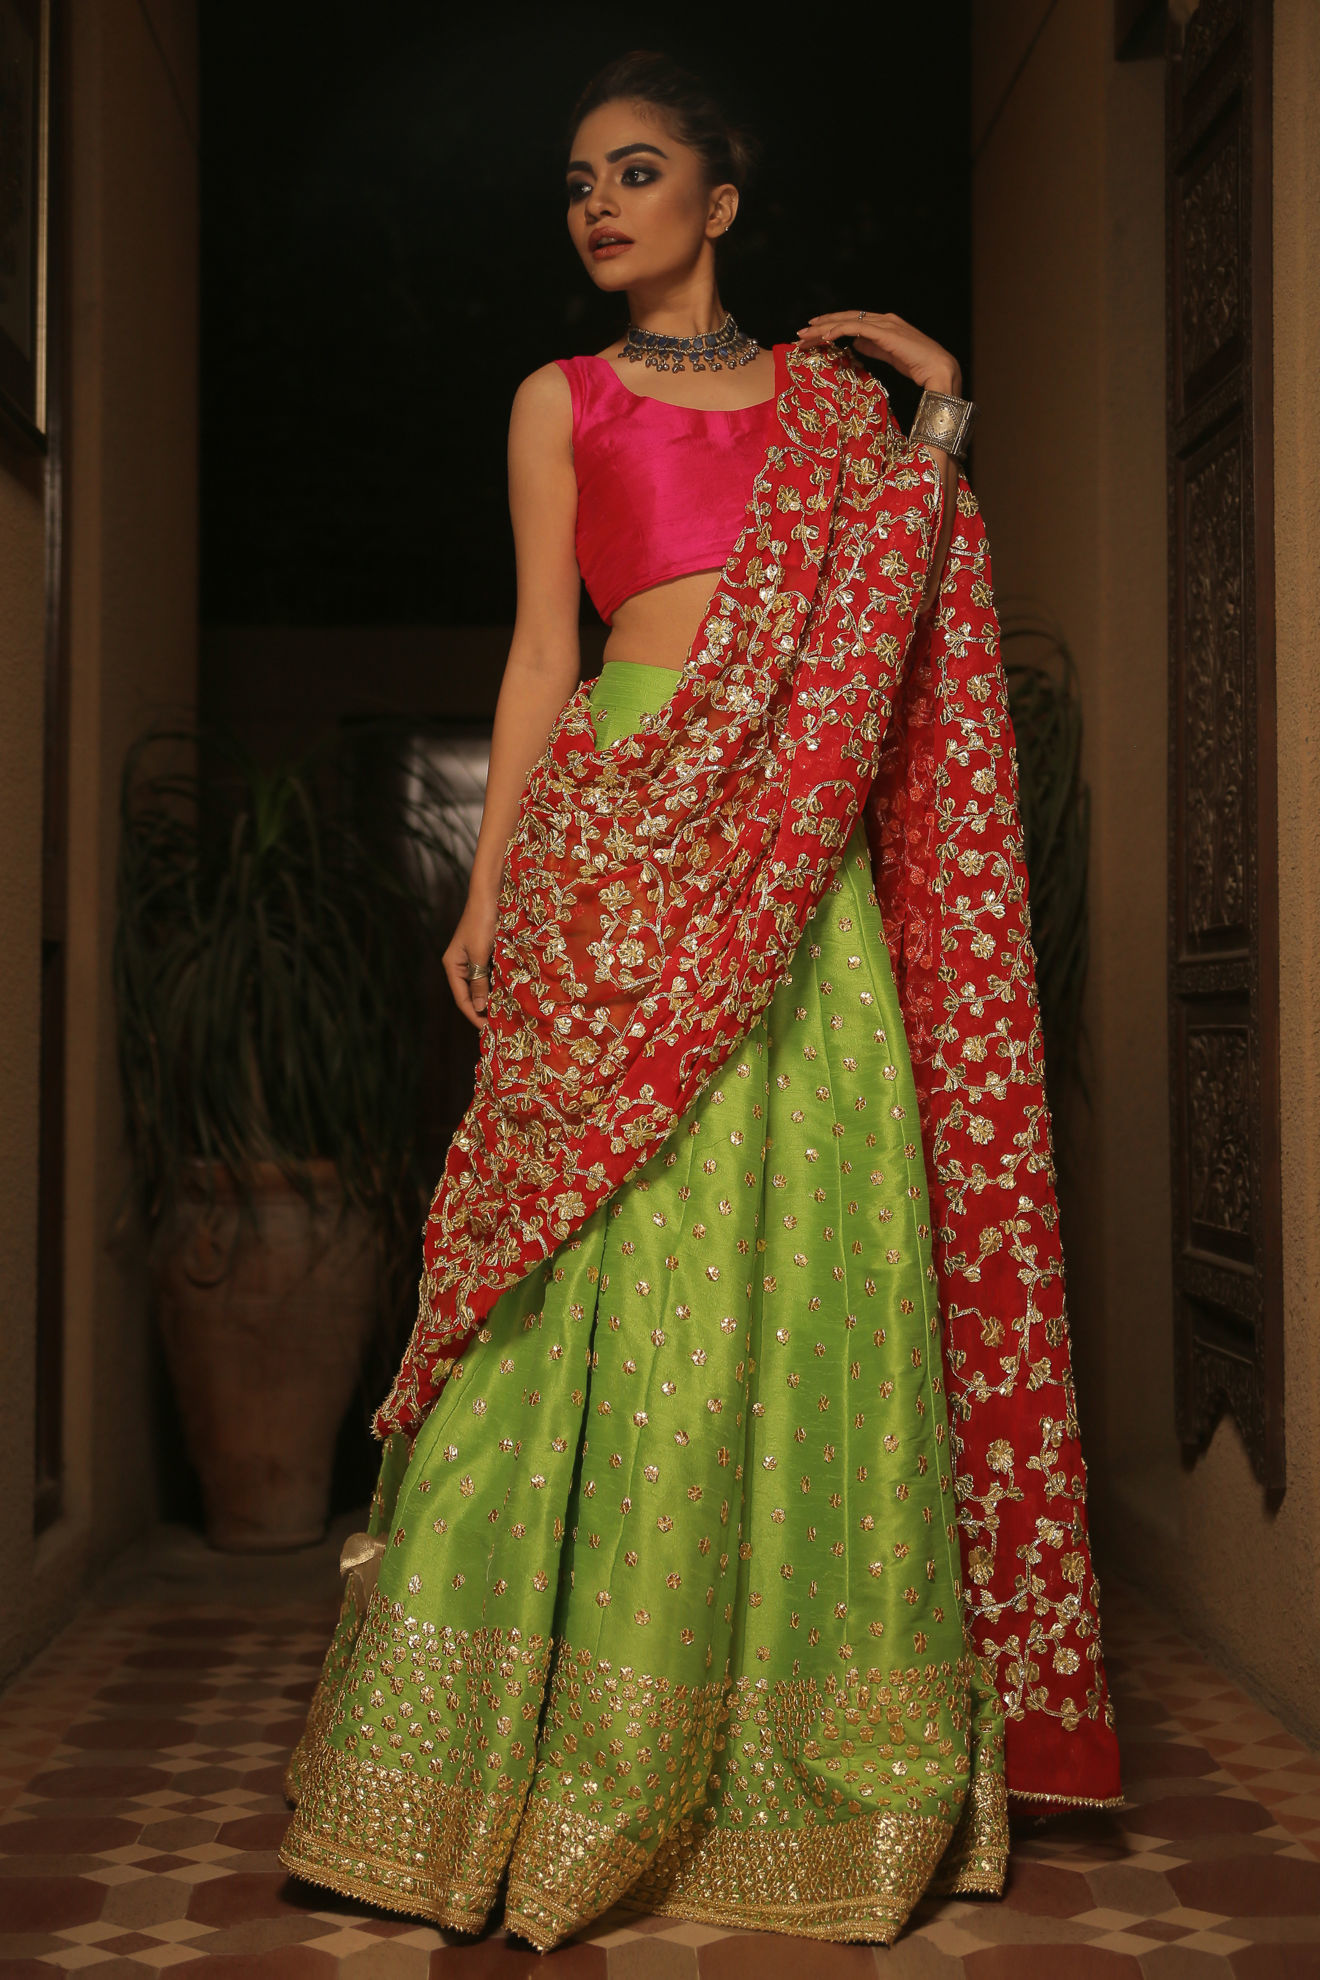 Purnaa in a green and pink combination half saree for 